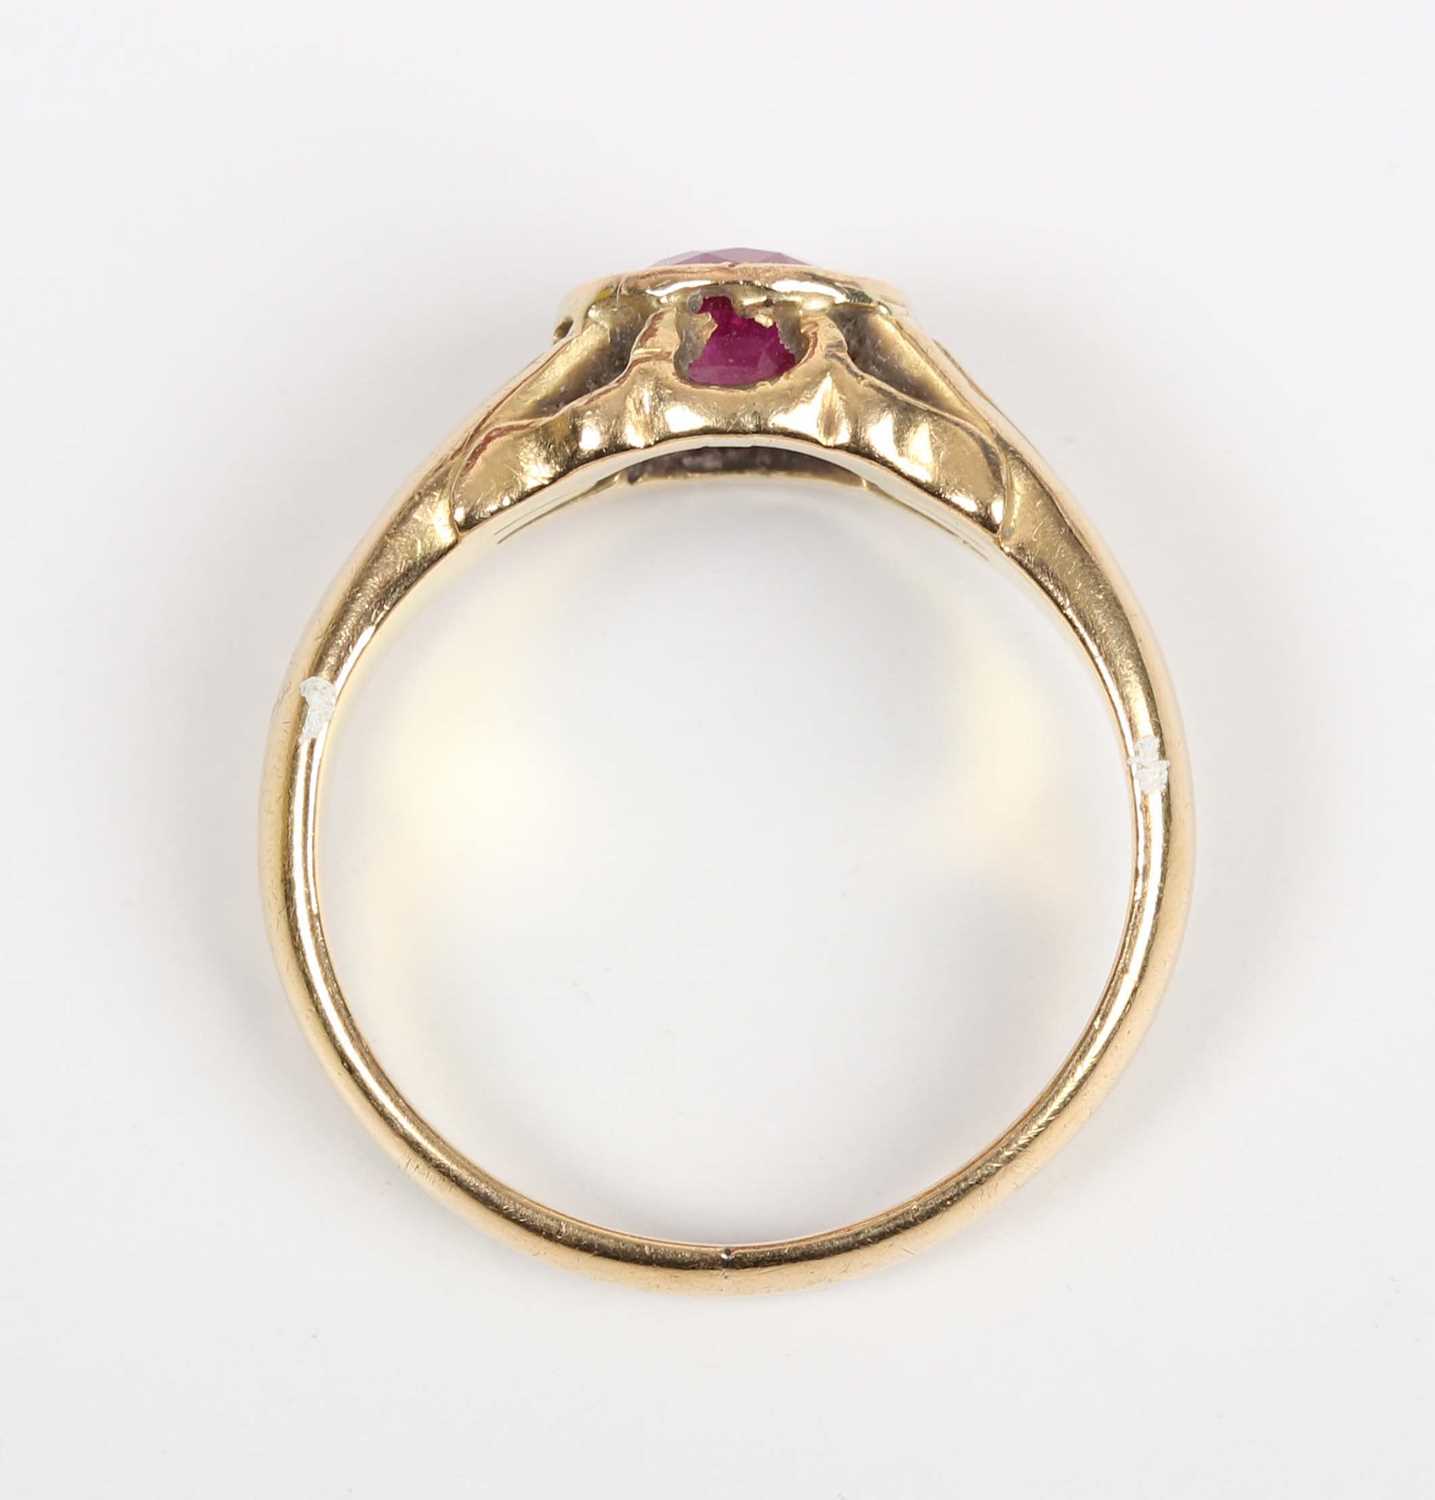 A gold ring, mounted with an oval cut treated ruby, detailed ‘18ct’, weight 6.4g, ruby weight approx - Image 4 of 5